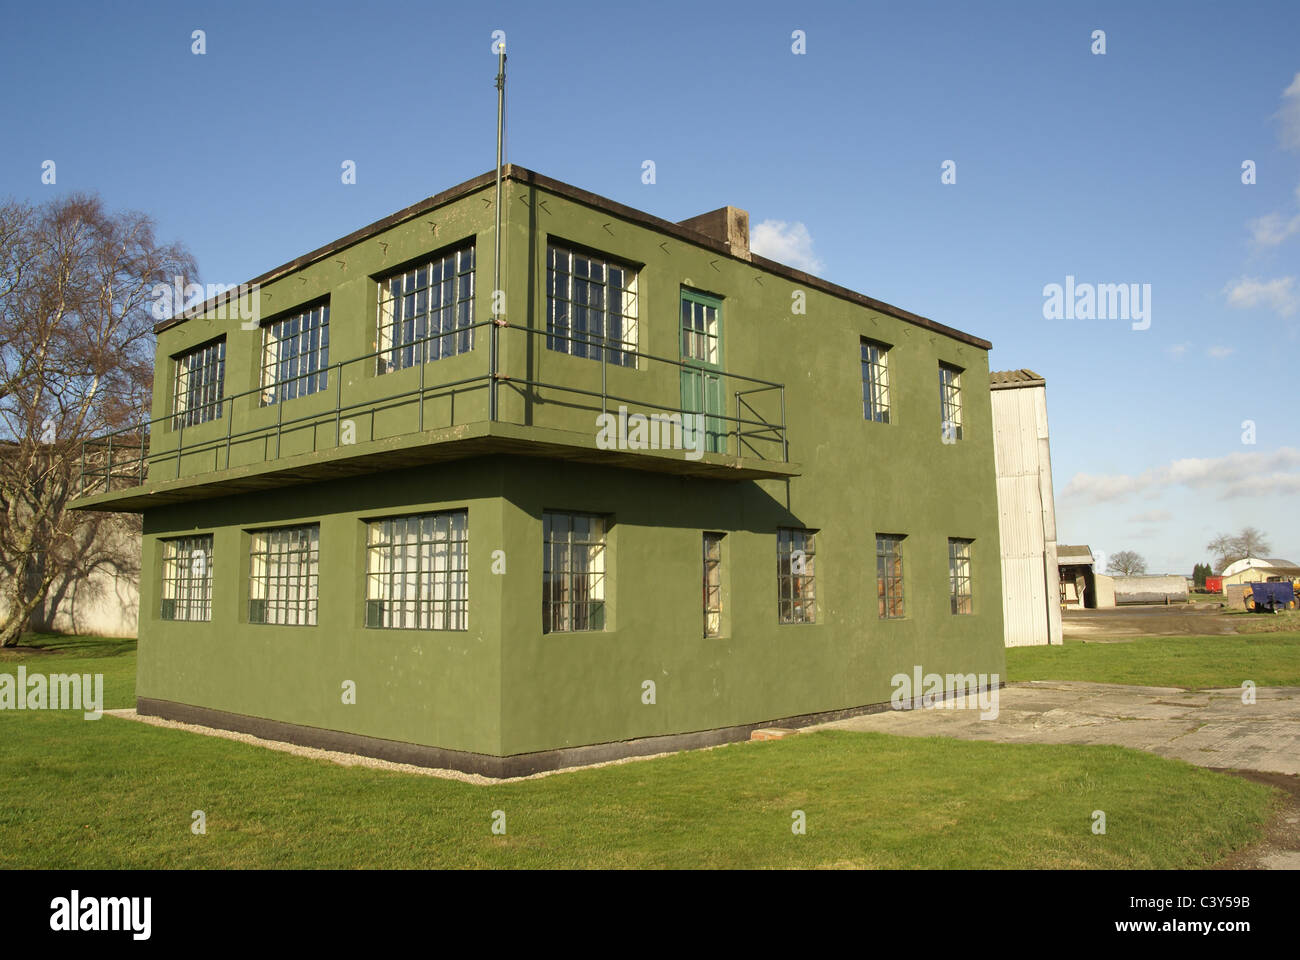 world war two Airfield control tower Stock Photo